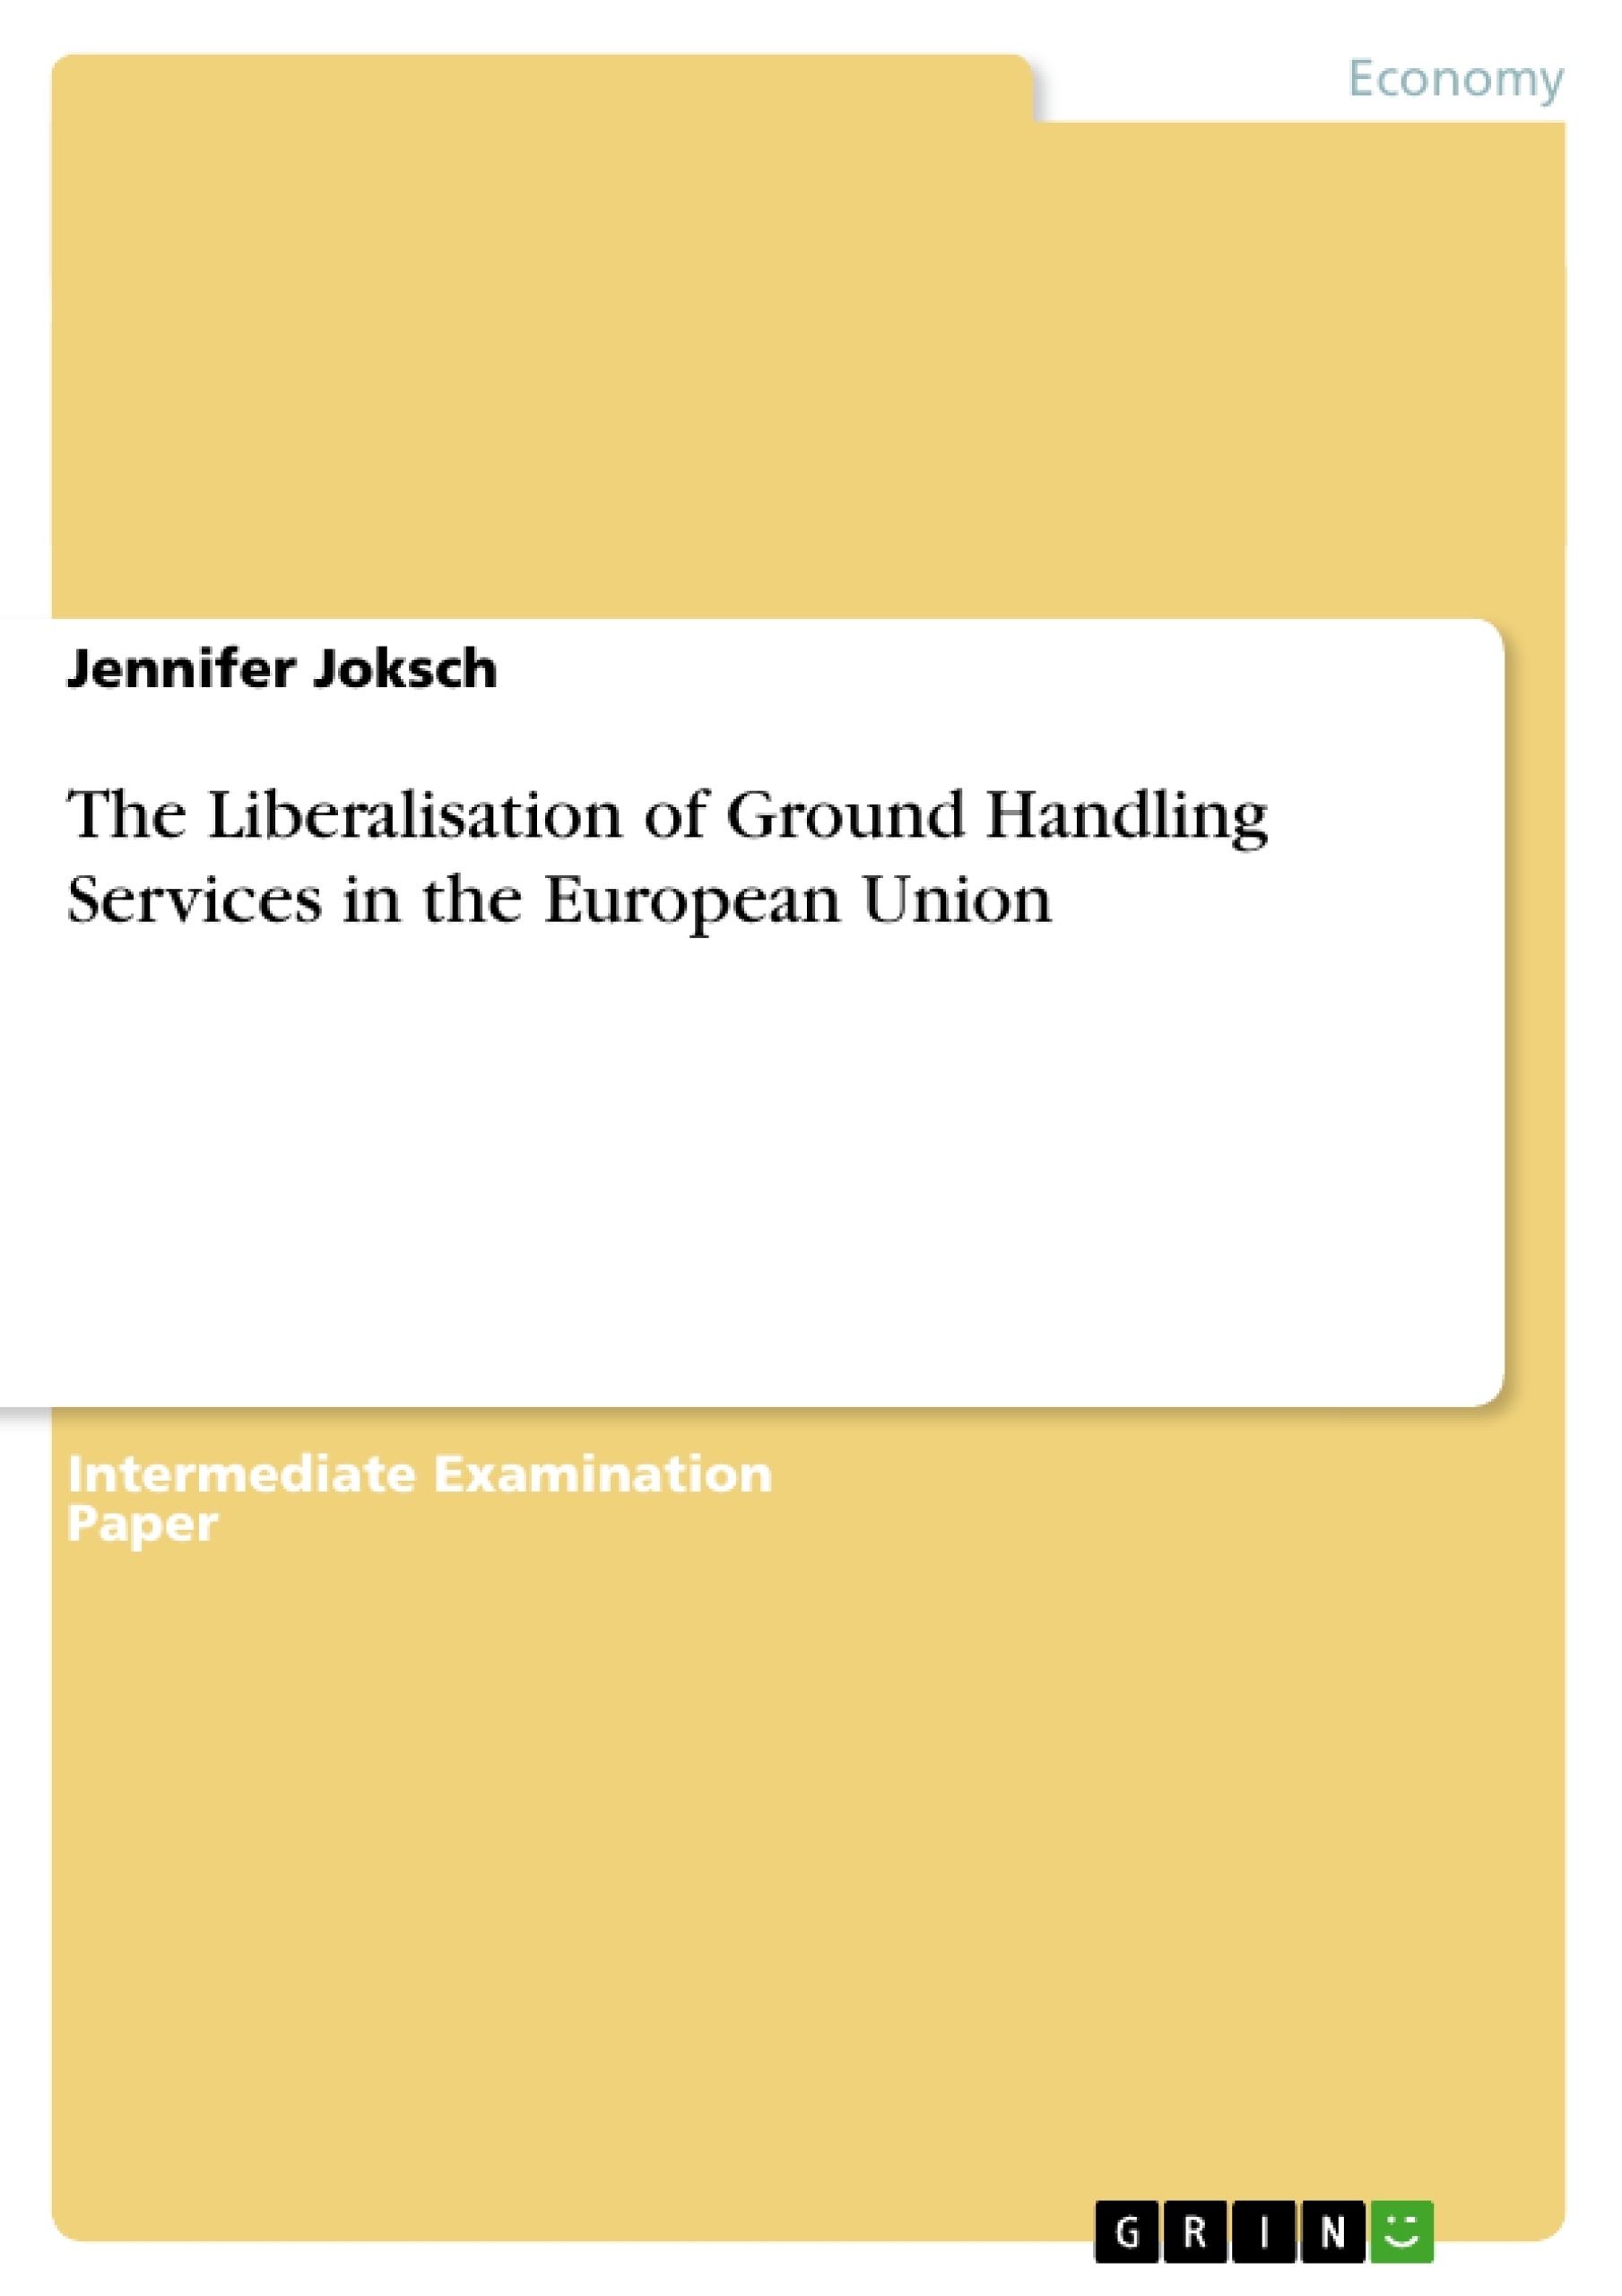 Titre: The Liberalisation of Ground Handling Services in the European Union